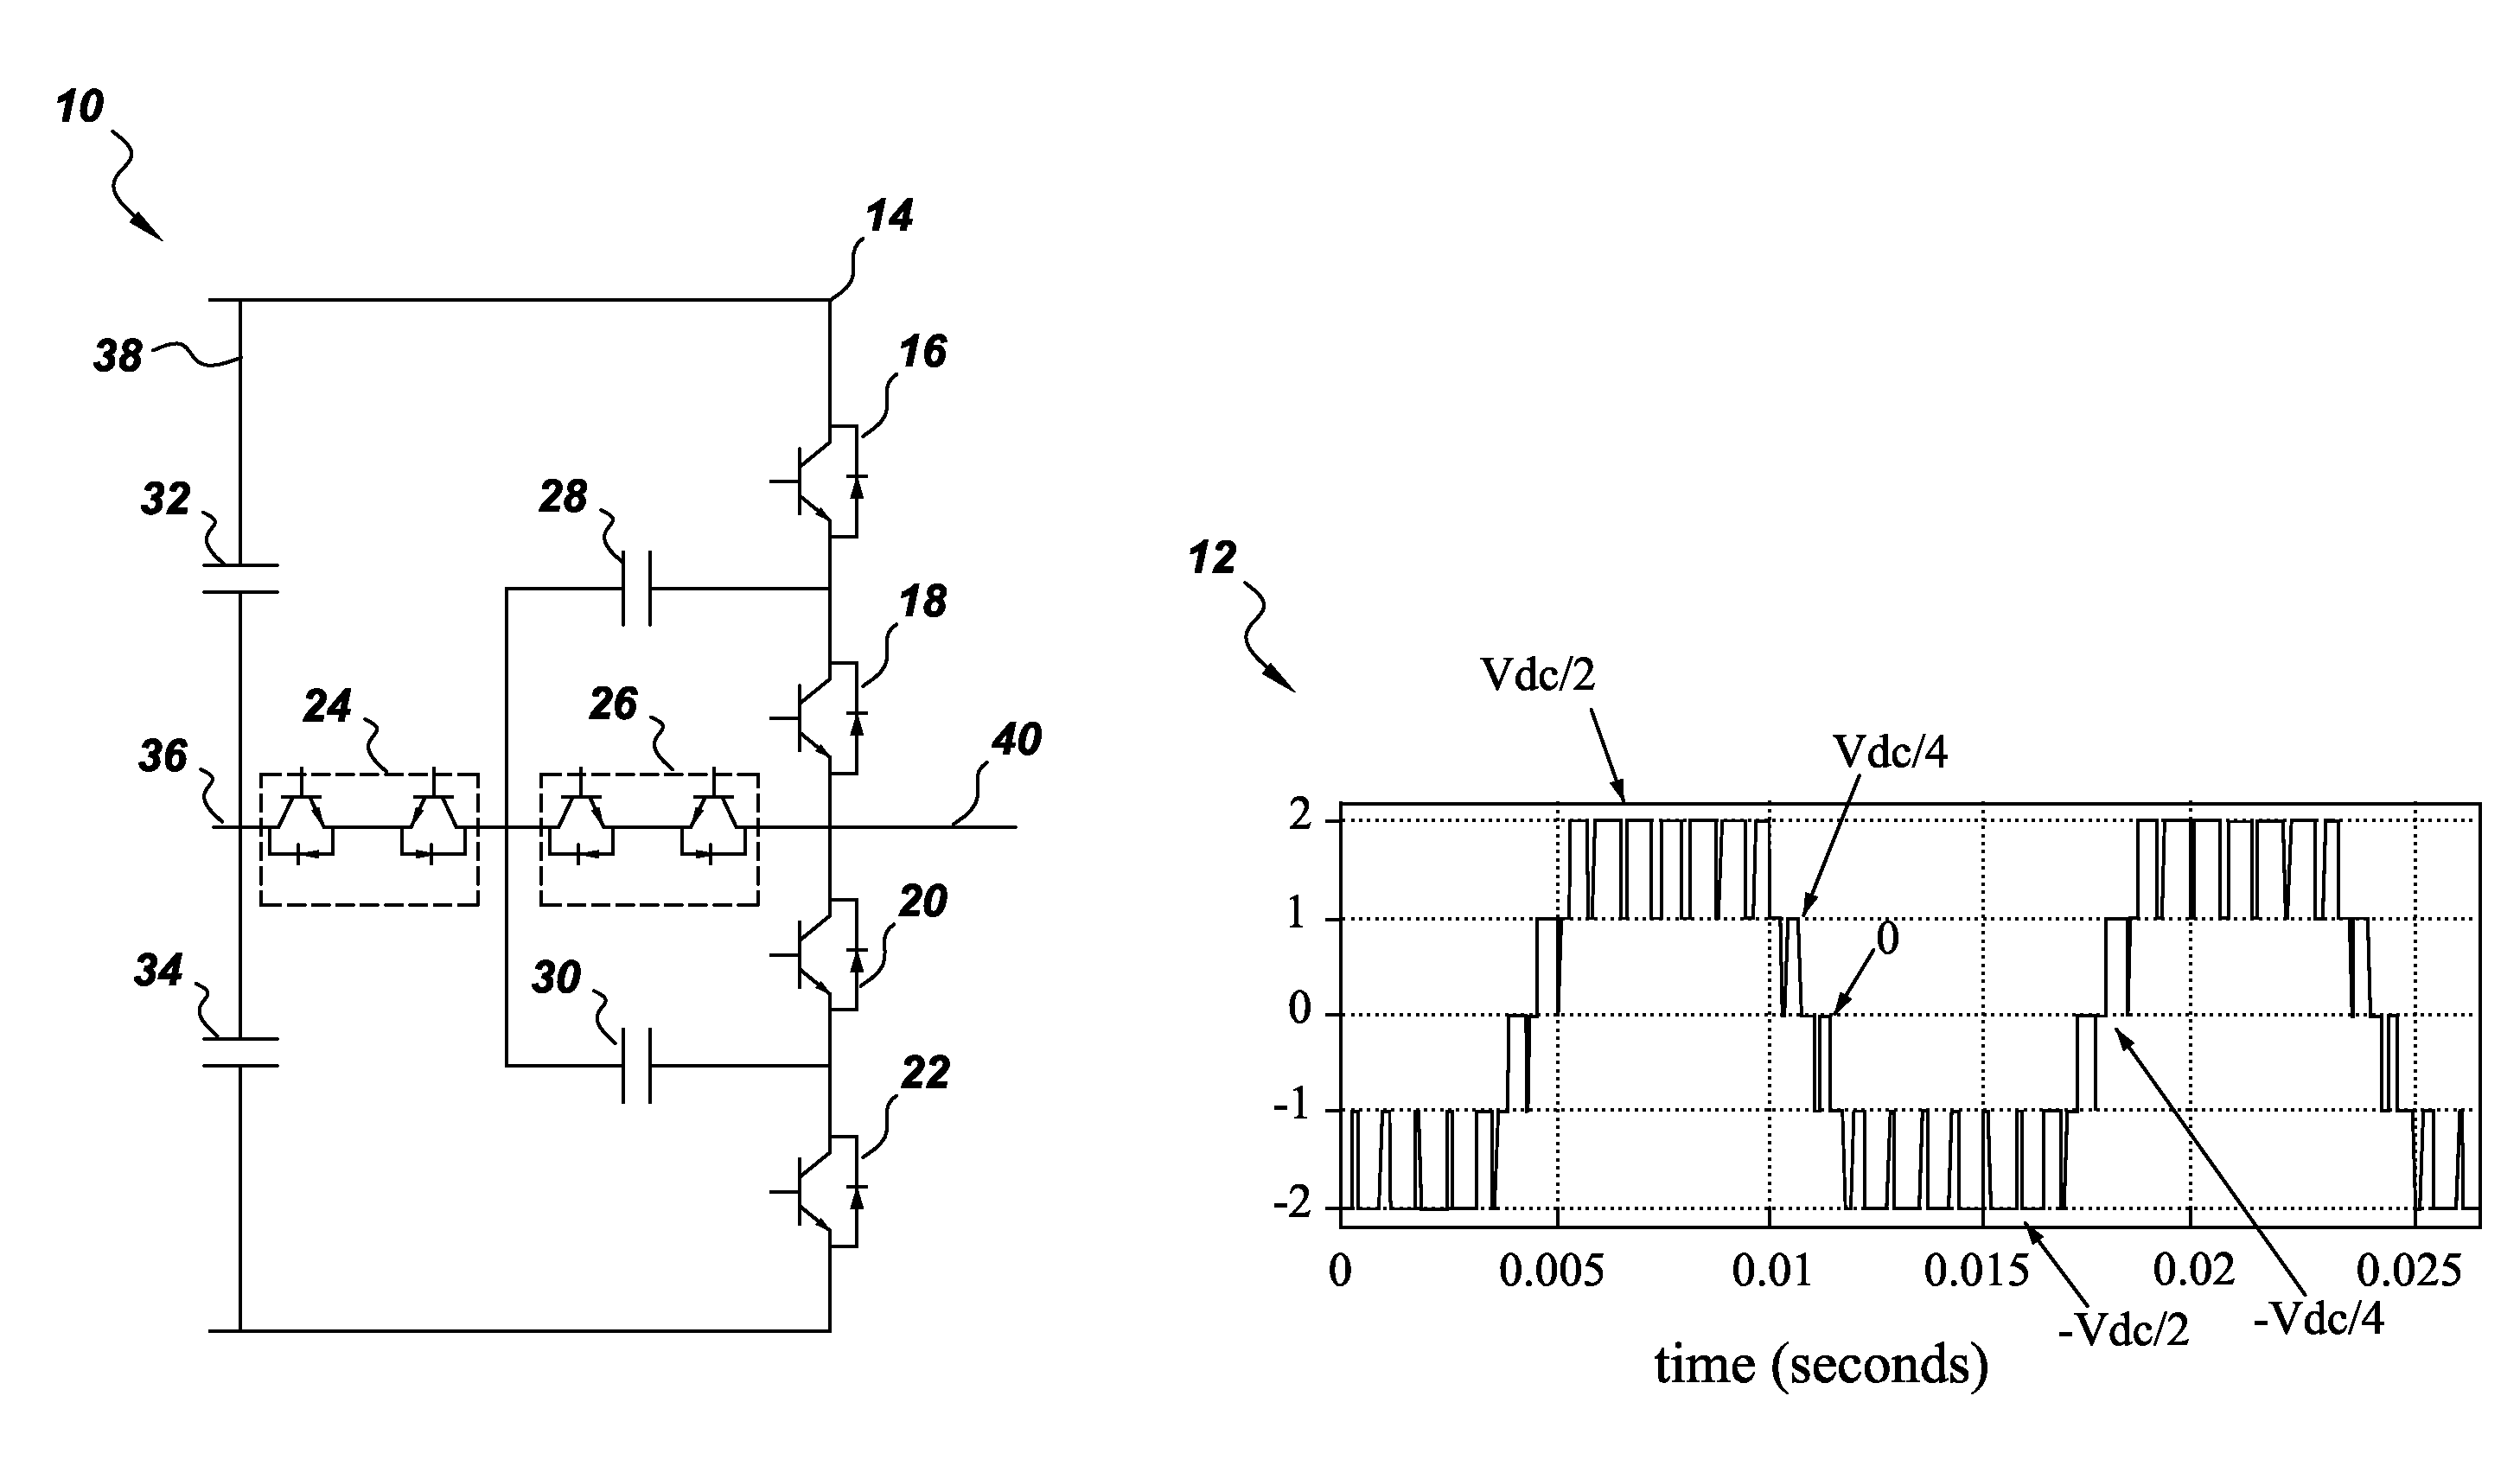 Voltage balancing system and method for multilevel converters